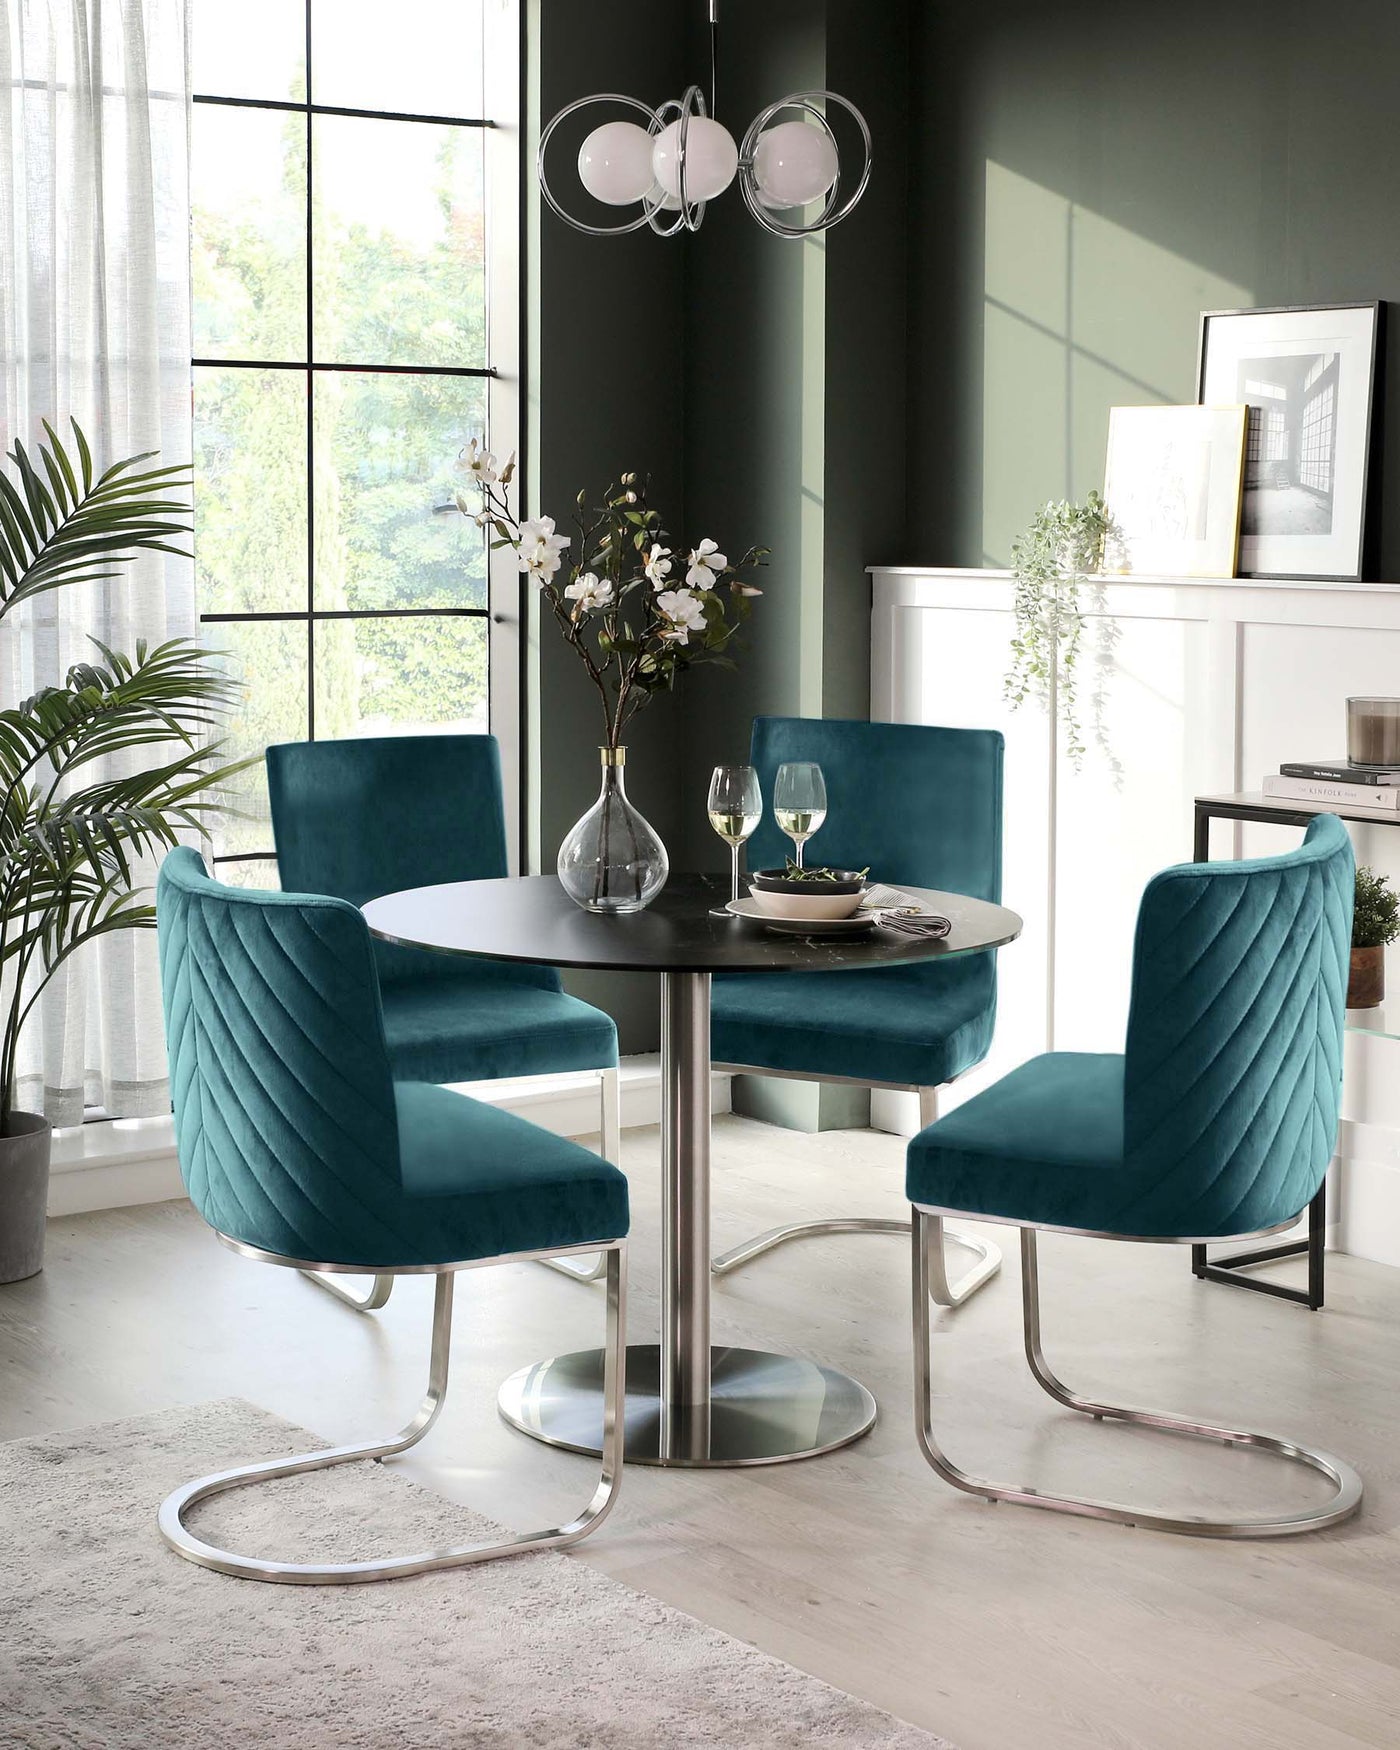 Modern dining room setup featuring an elegant round white table with a reflective metallic base and four luxurious teal velvet chairs designed with a unique quilted pattern and sleek silver cantilever frames.